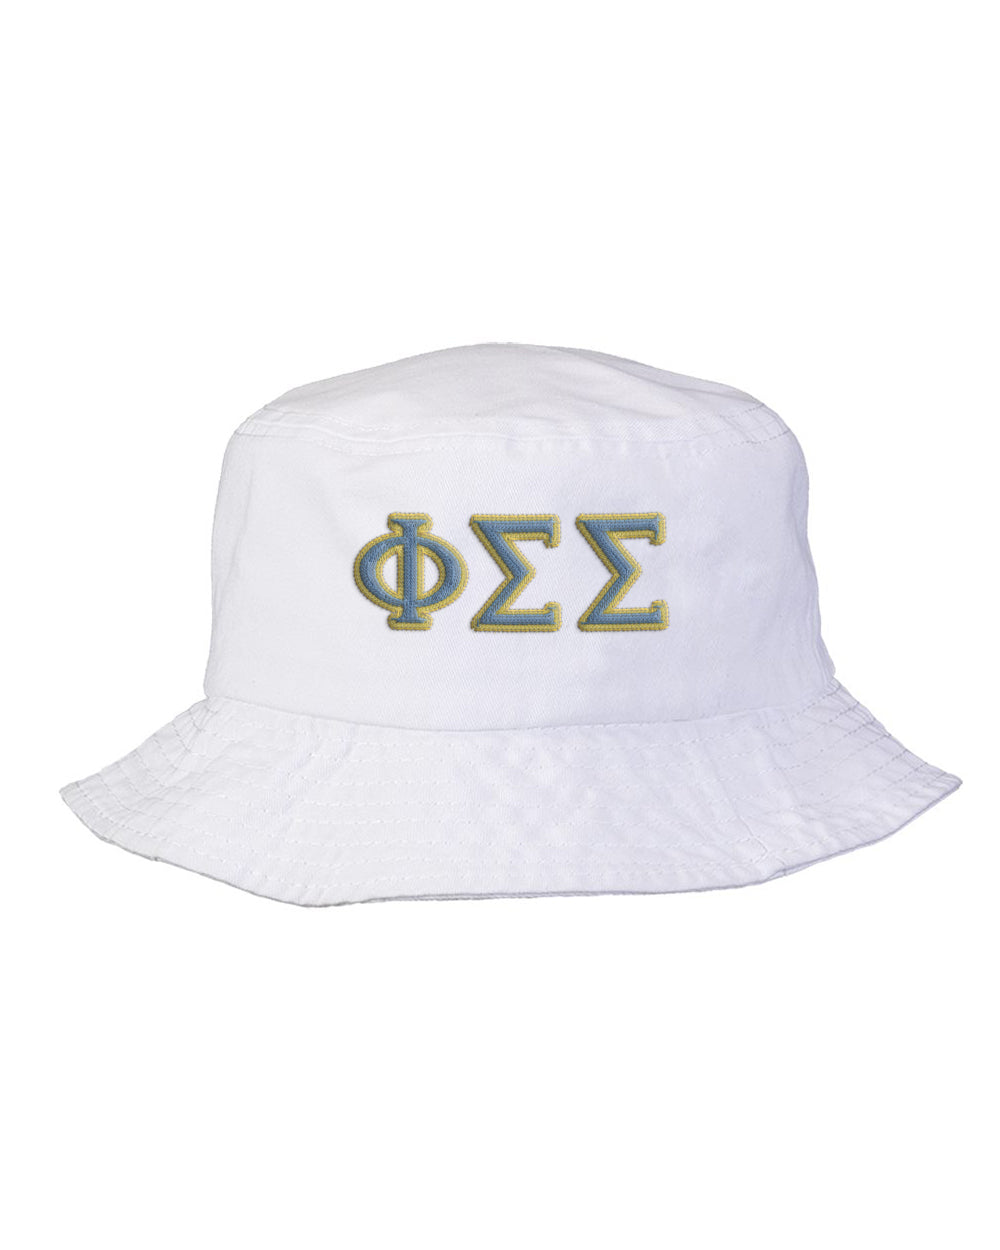 Phi Sigma Sigma  Embroidered Bucket Hat